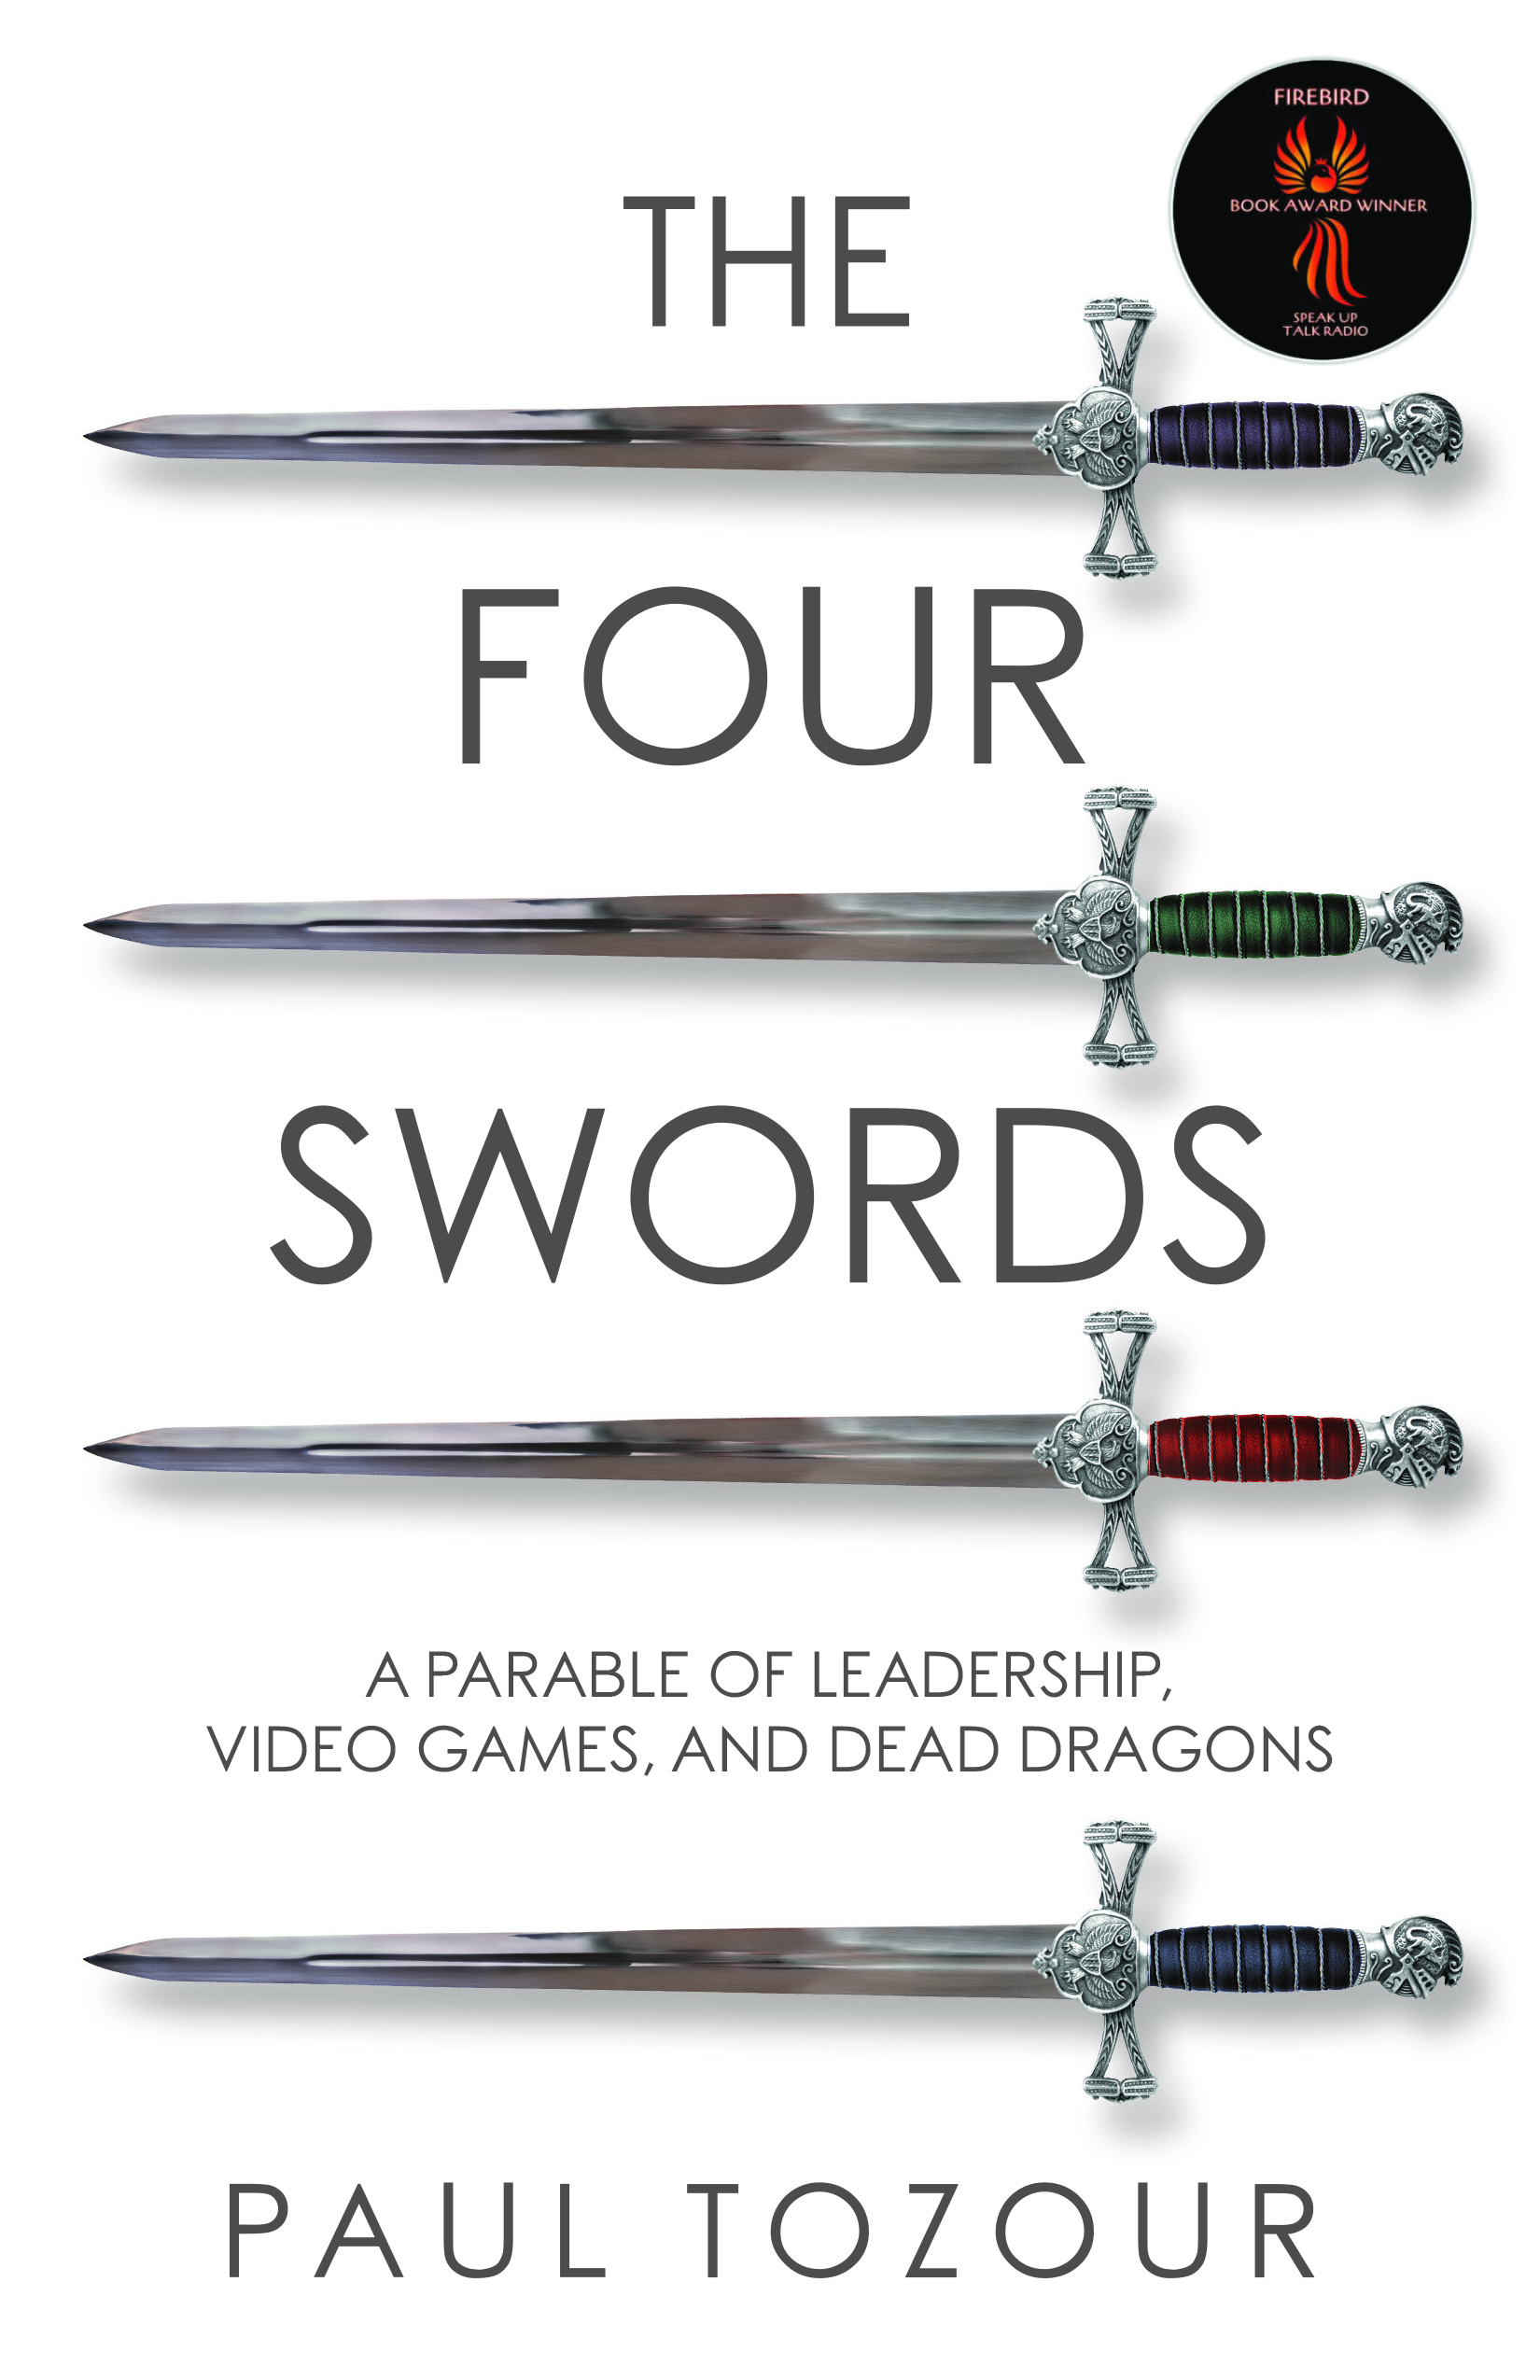 The Four Swords: A Parable of Leadership, Video Games and Dead Dragons by Paul Tozour